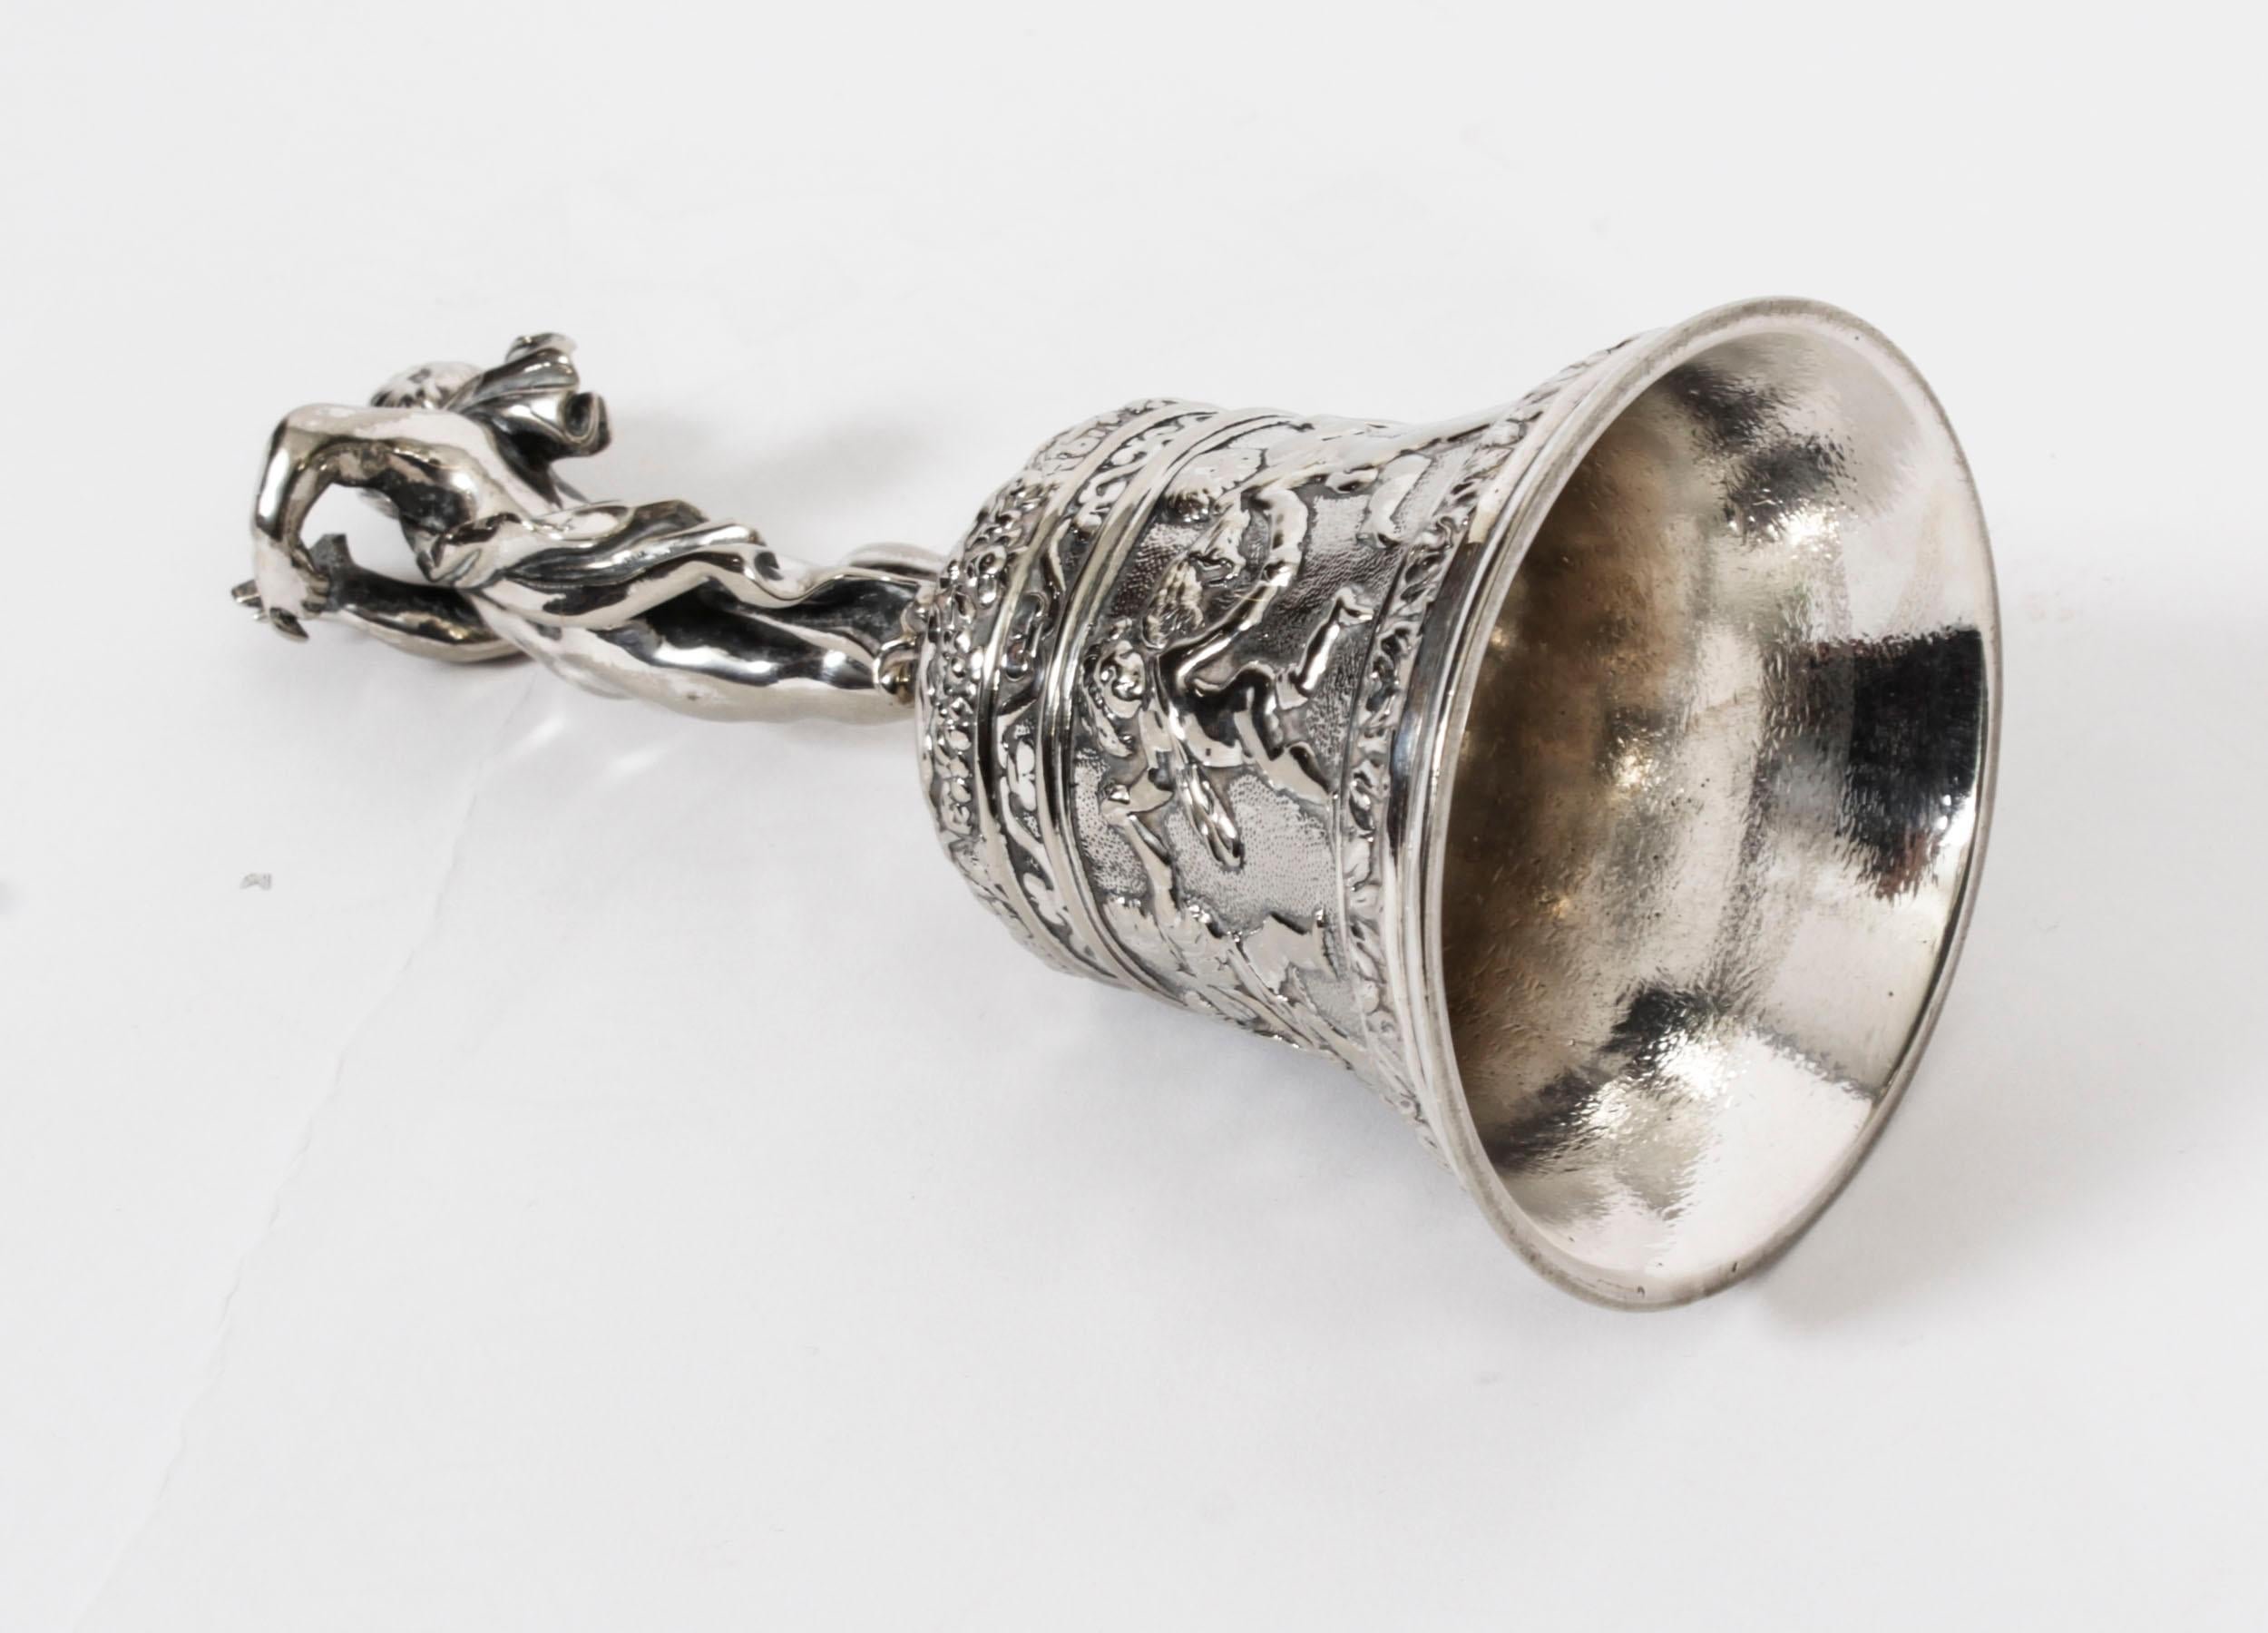 Antique Silver Plated Hand Bell Renaissance Revival 19th Century For Sale 9